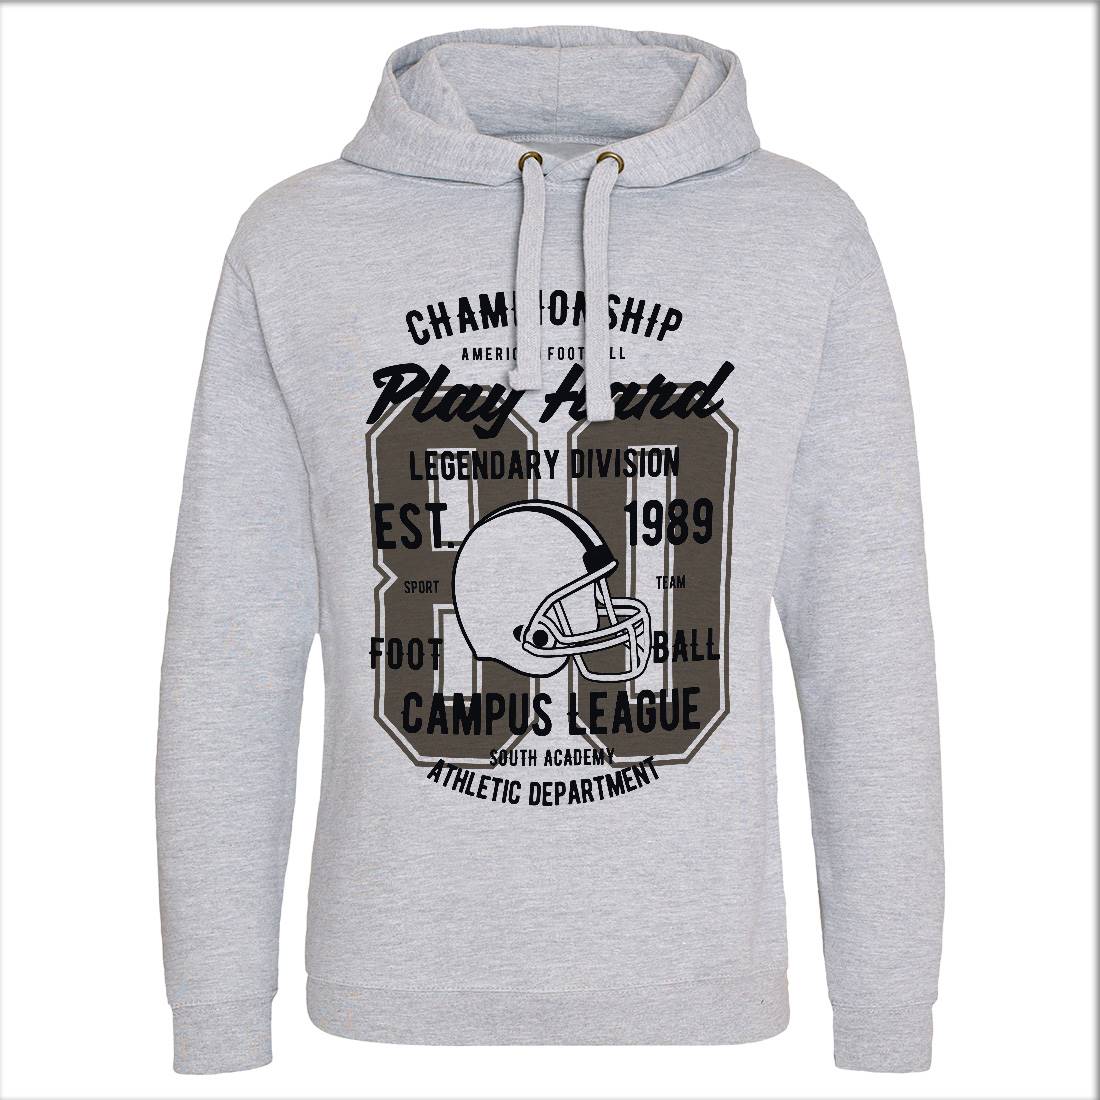 Play Hard Football Mens Hoodie Without Pocket Sport B435